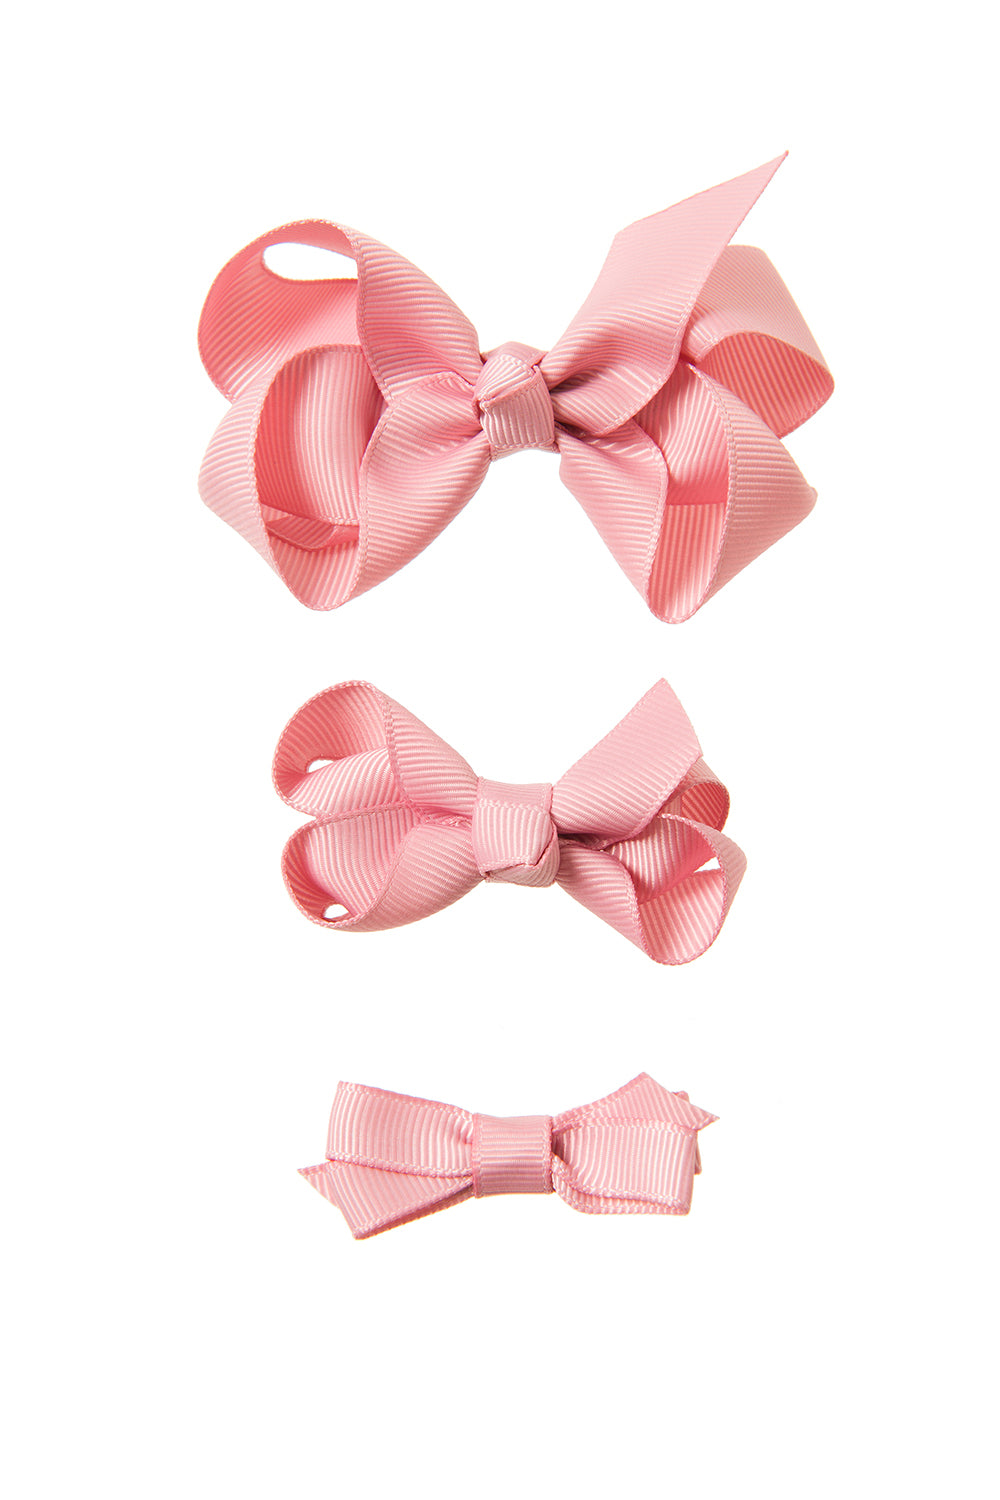 Pale Pink Hair bow clips